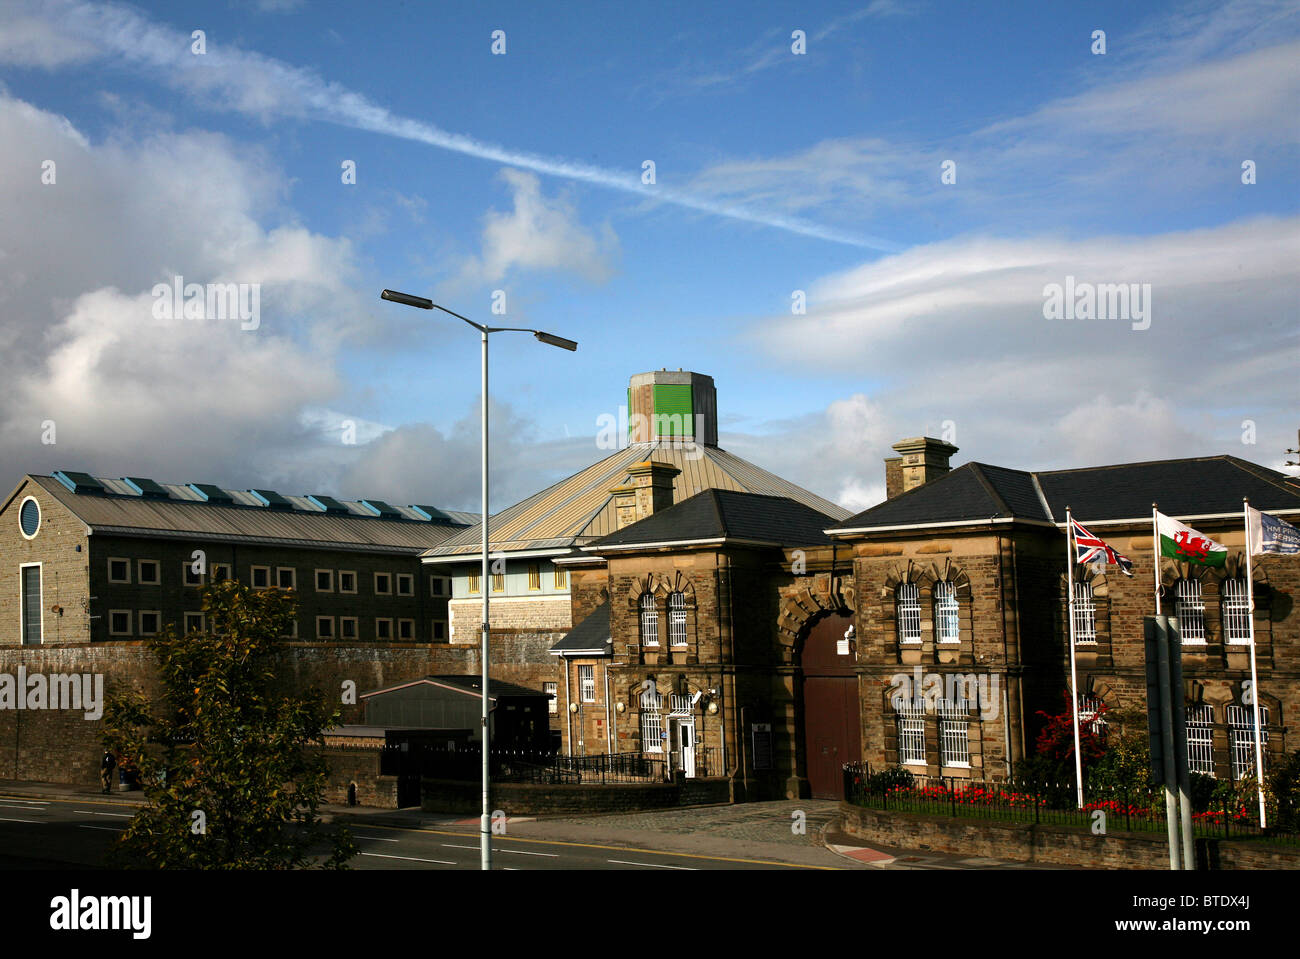 HM Prison, Oystermouth Rd Swansea Wales, UK. Stock Photo